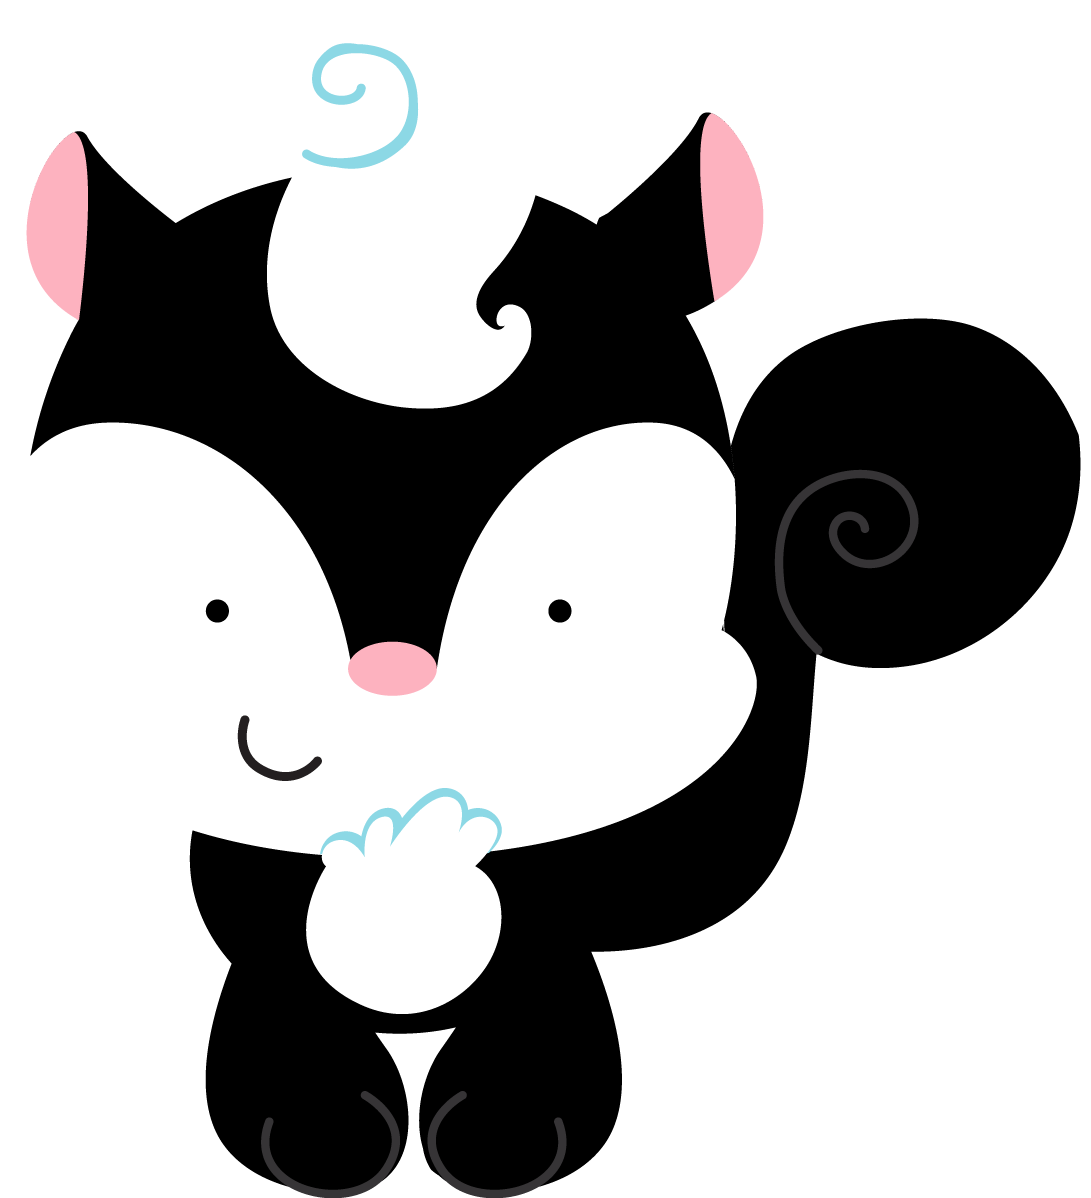 Mice clipart woodland. Zwd tree skunk png